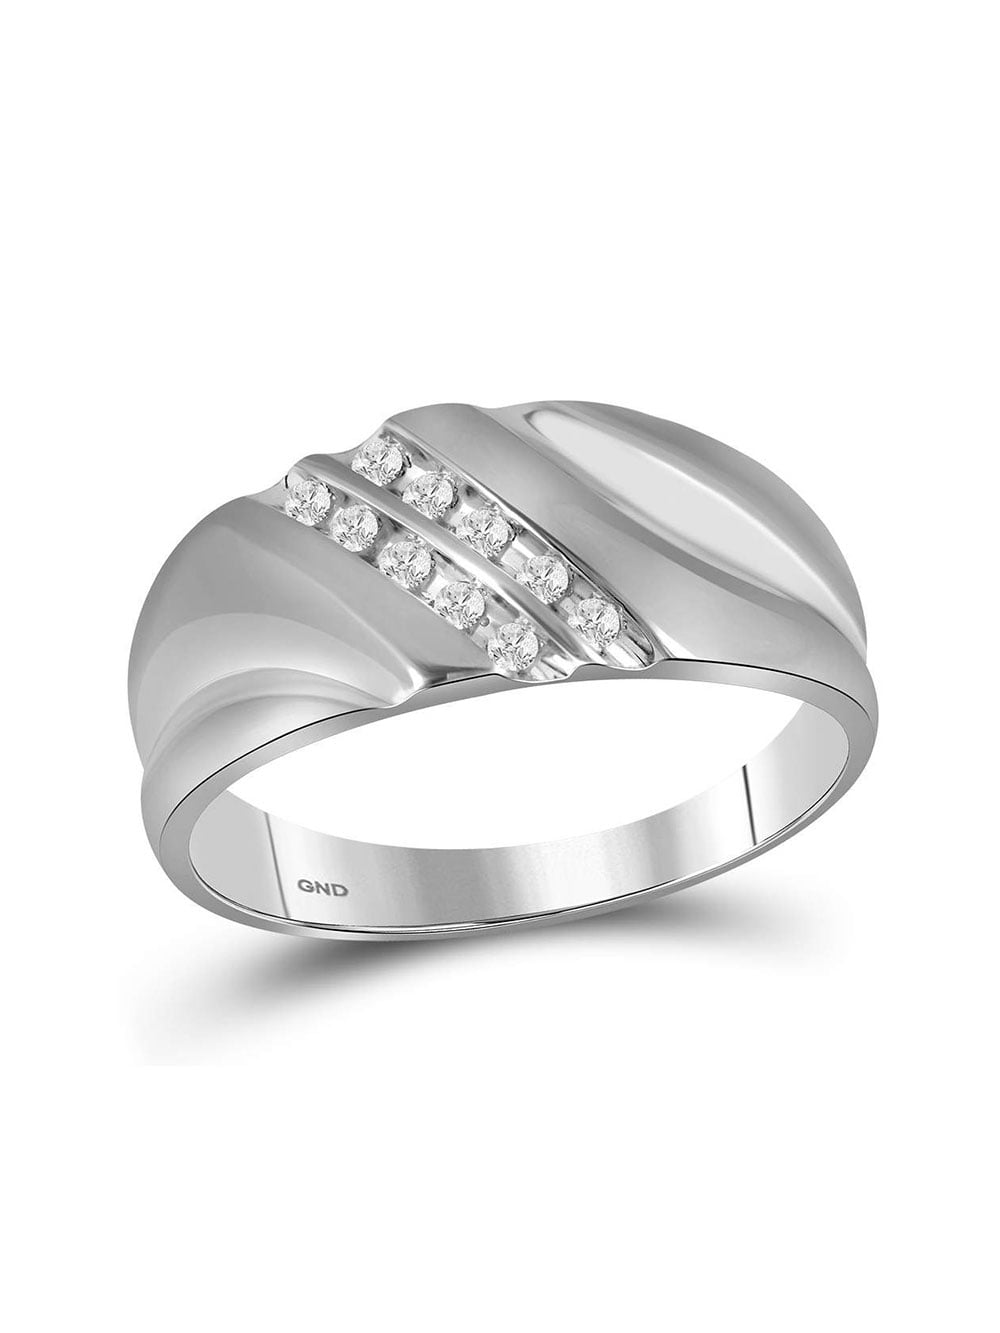 Mens Diamond Wedding Band .925 Sterling Silver Engagement Ring 0.25 Ct. 